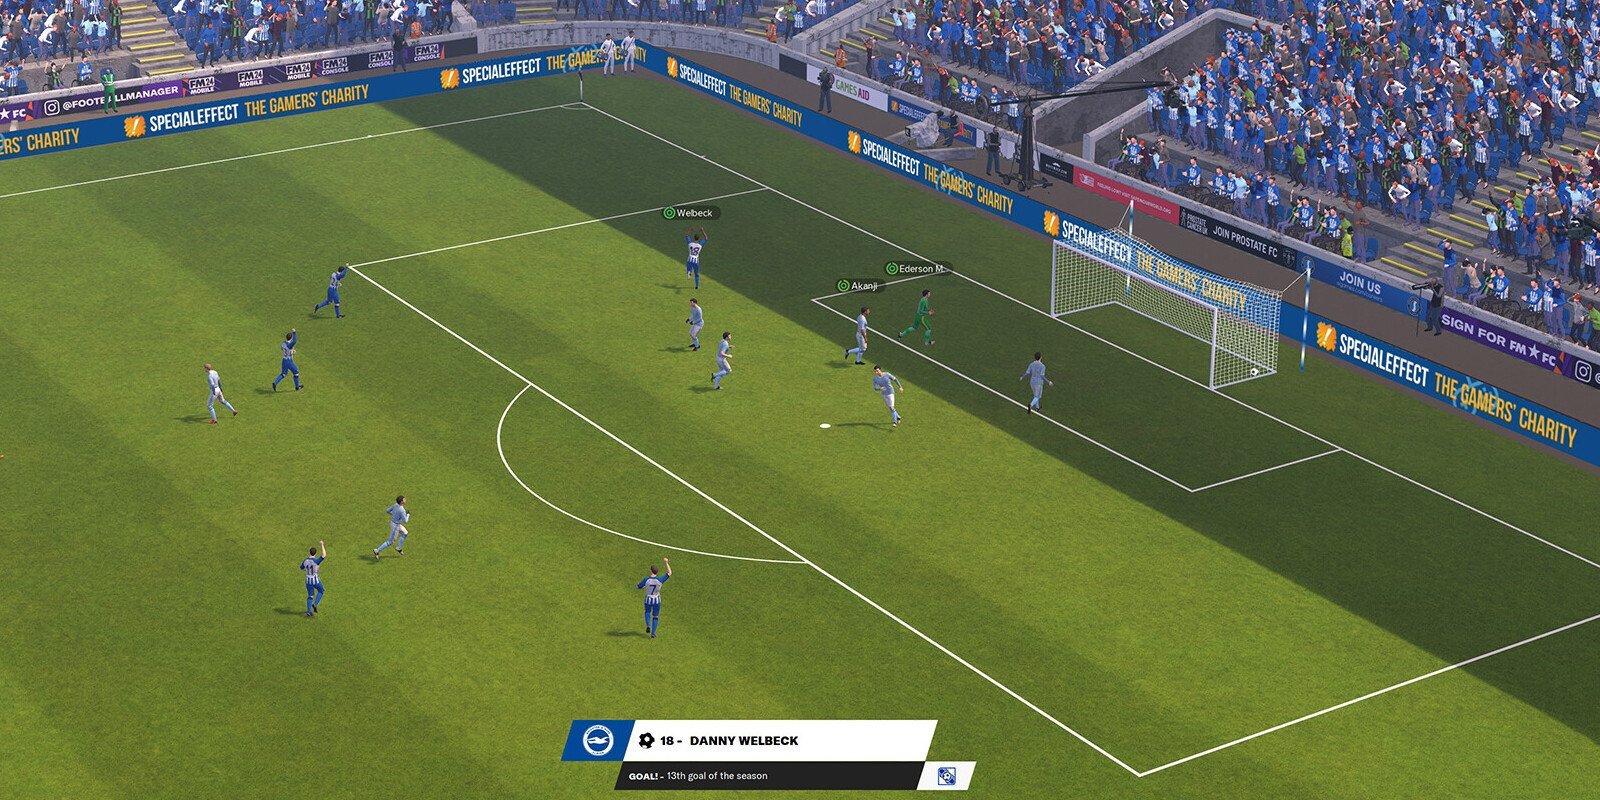 When is Football Manager 2024 mobile out? What we know